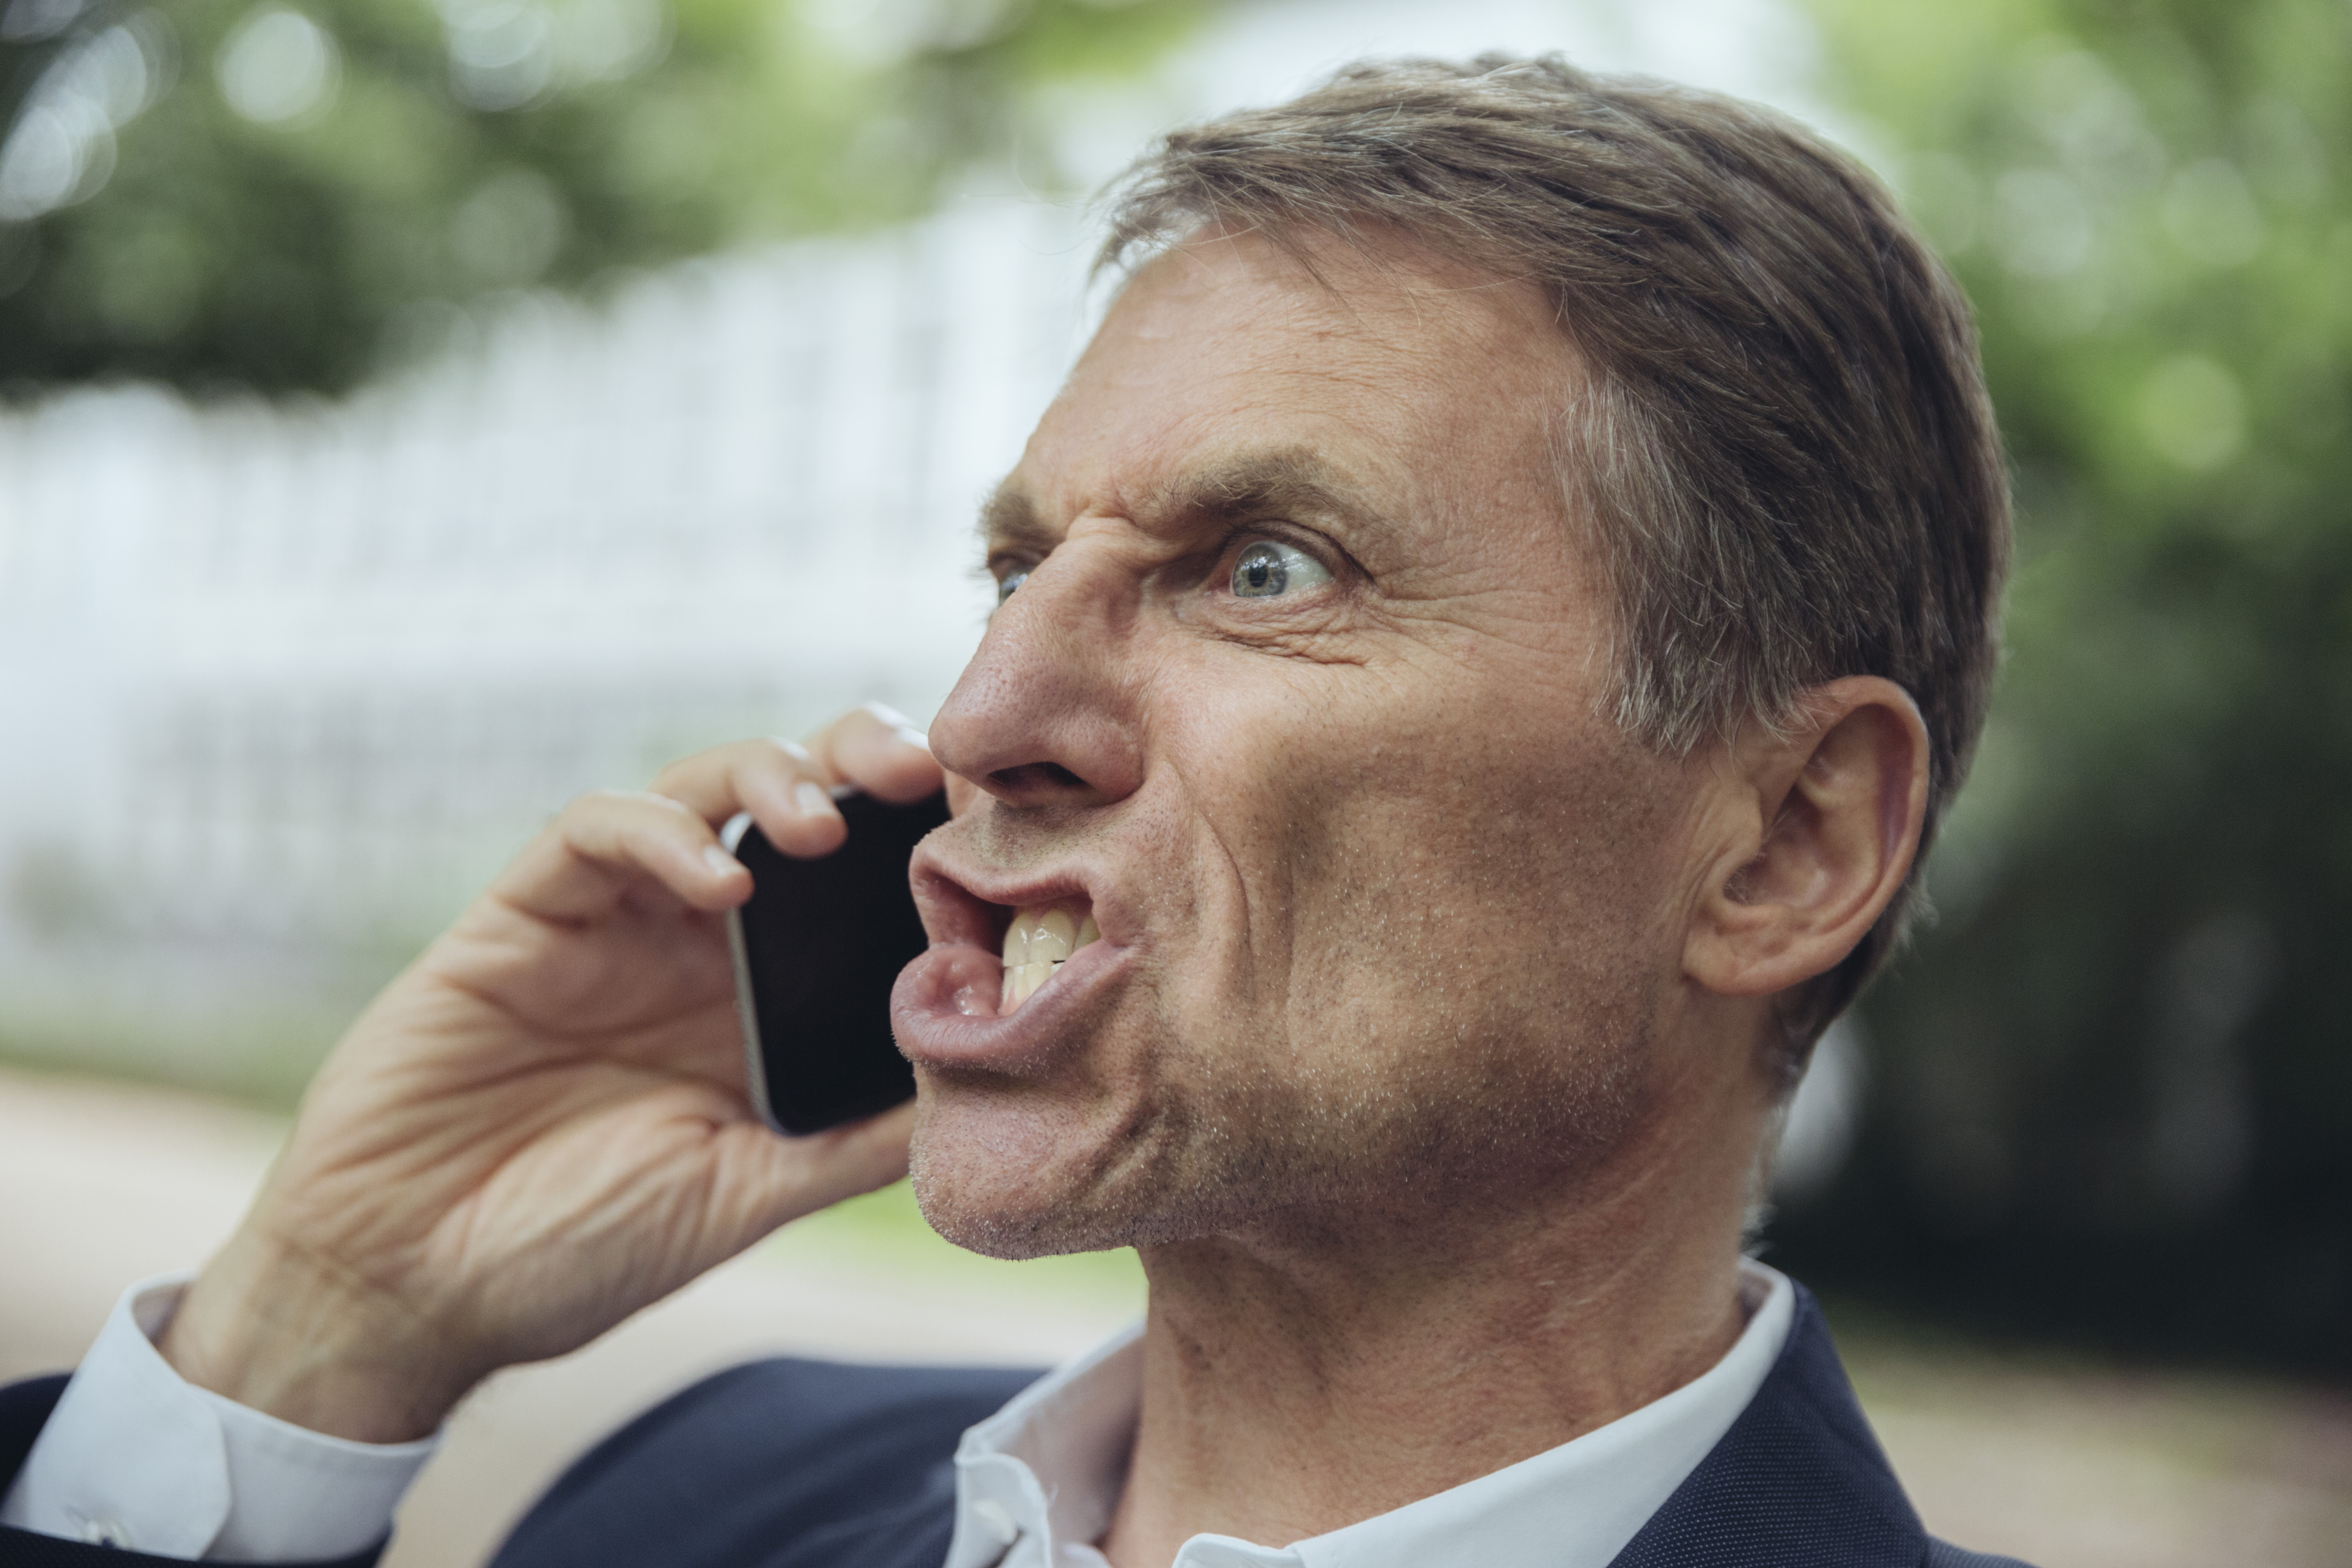 Angry man on a phone call | Source: Getty Images